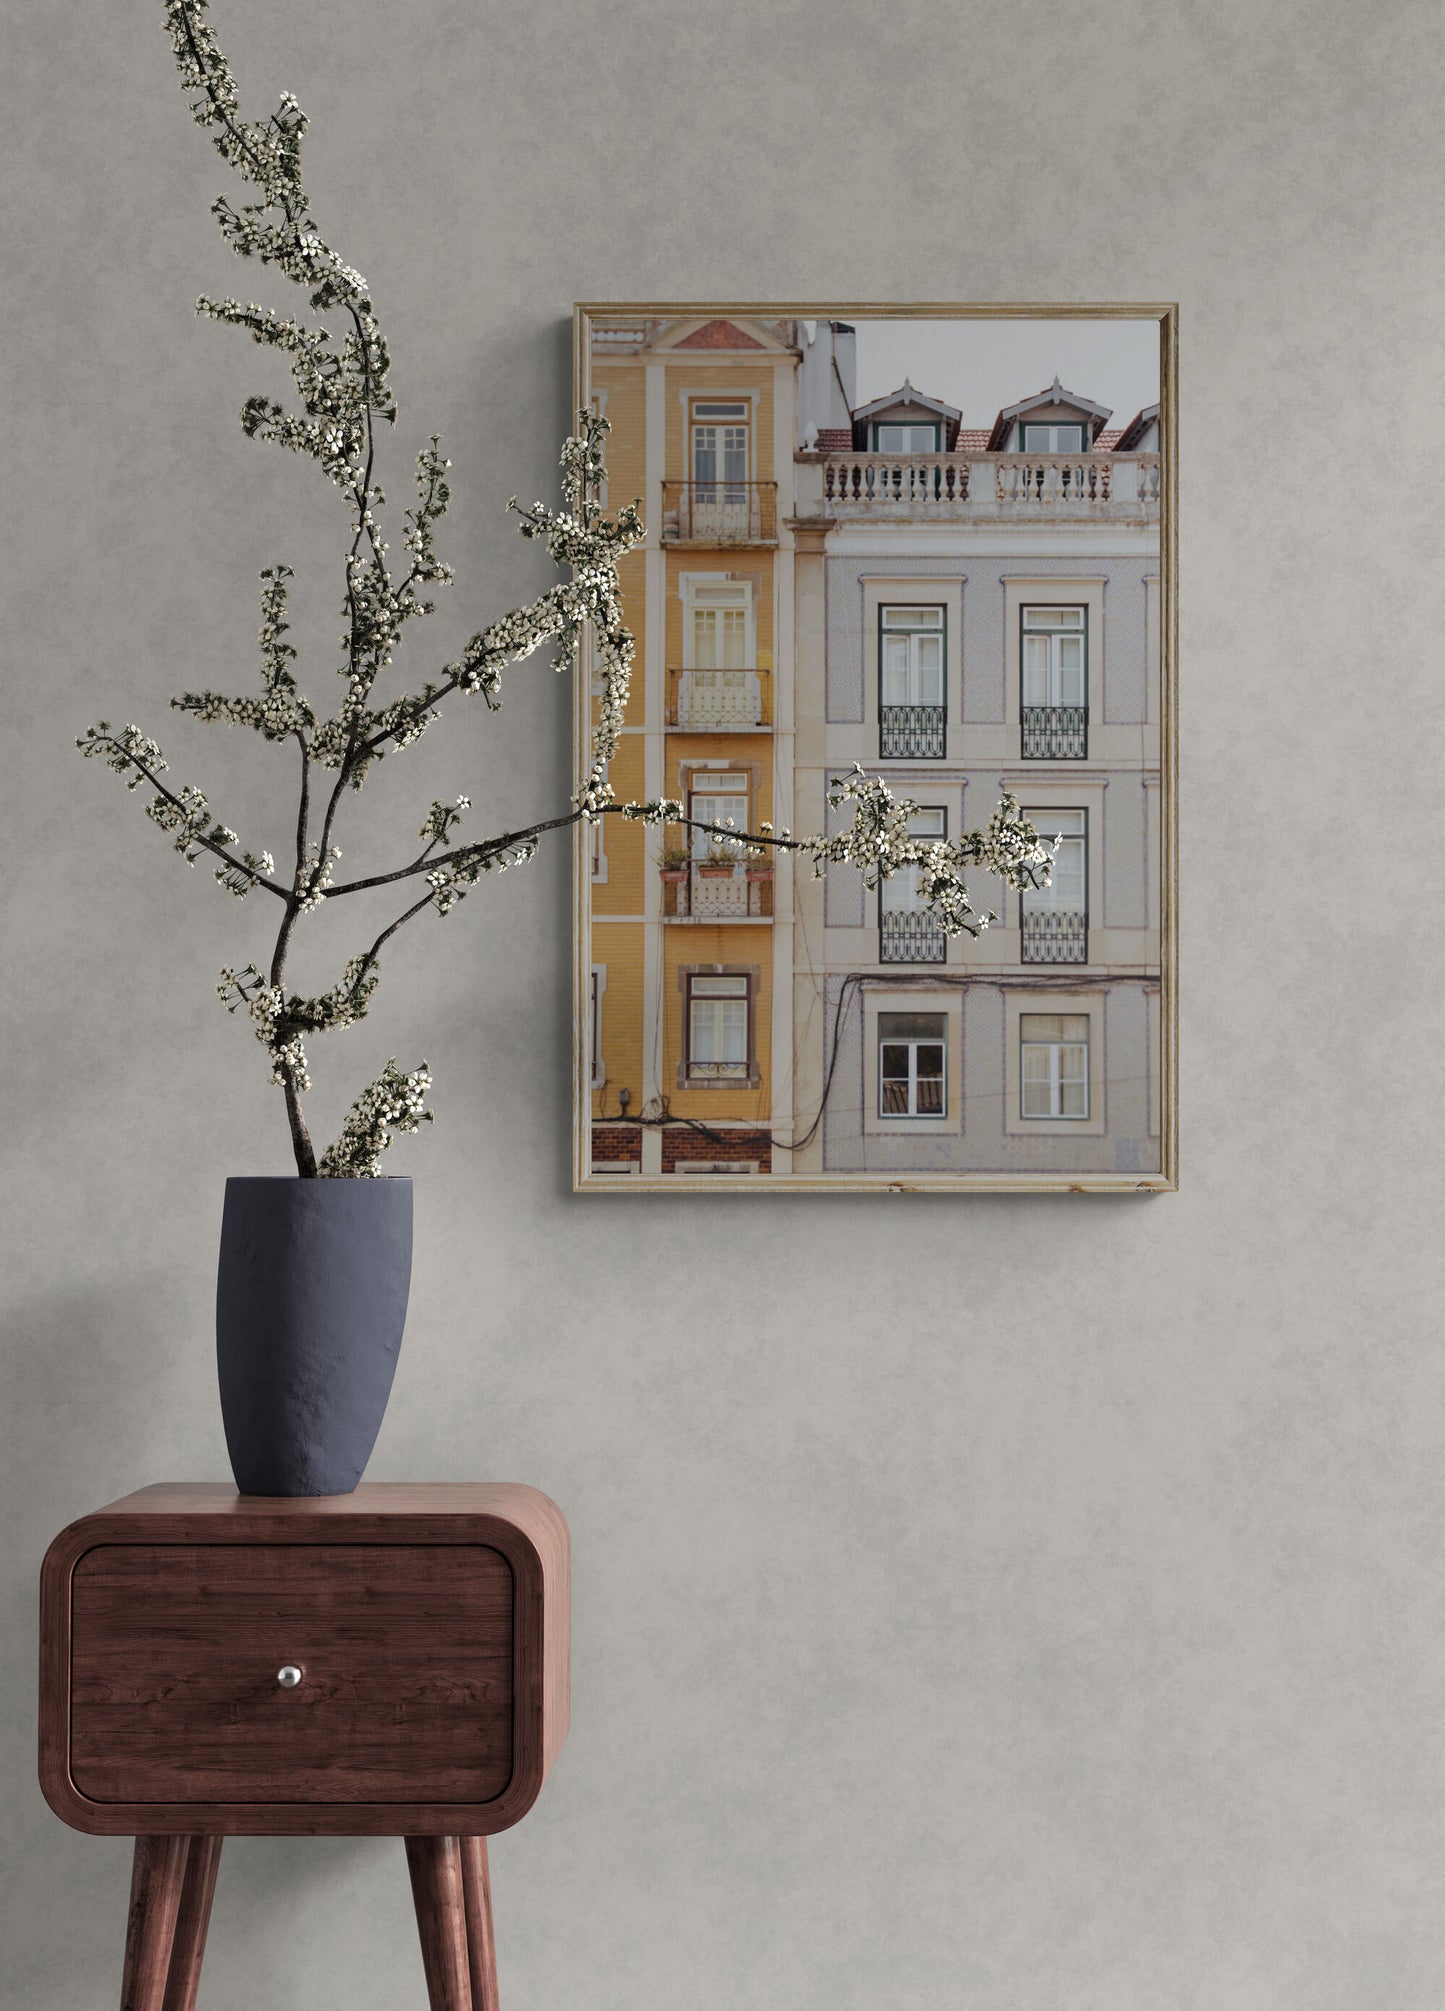 Tiled buildings of lisbon portugal photography print as home decor in an entryway